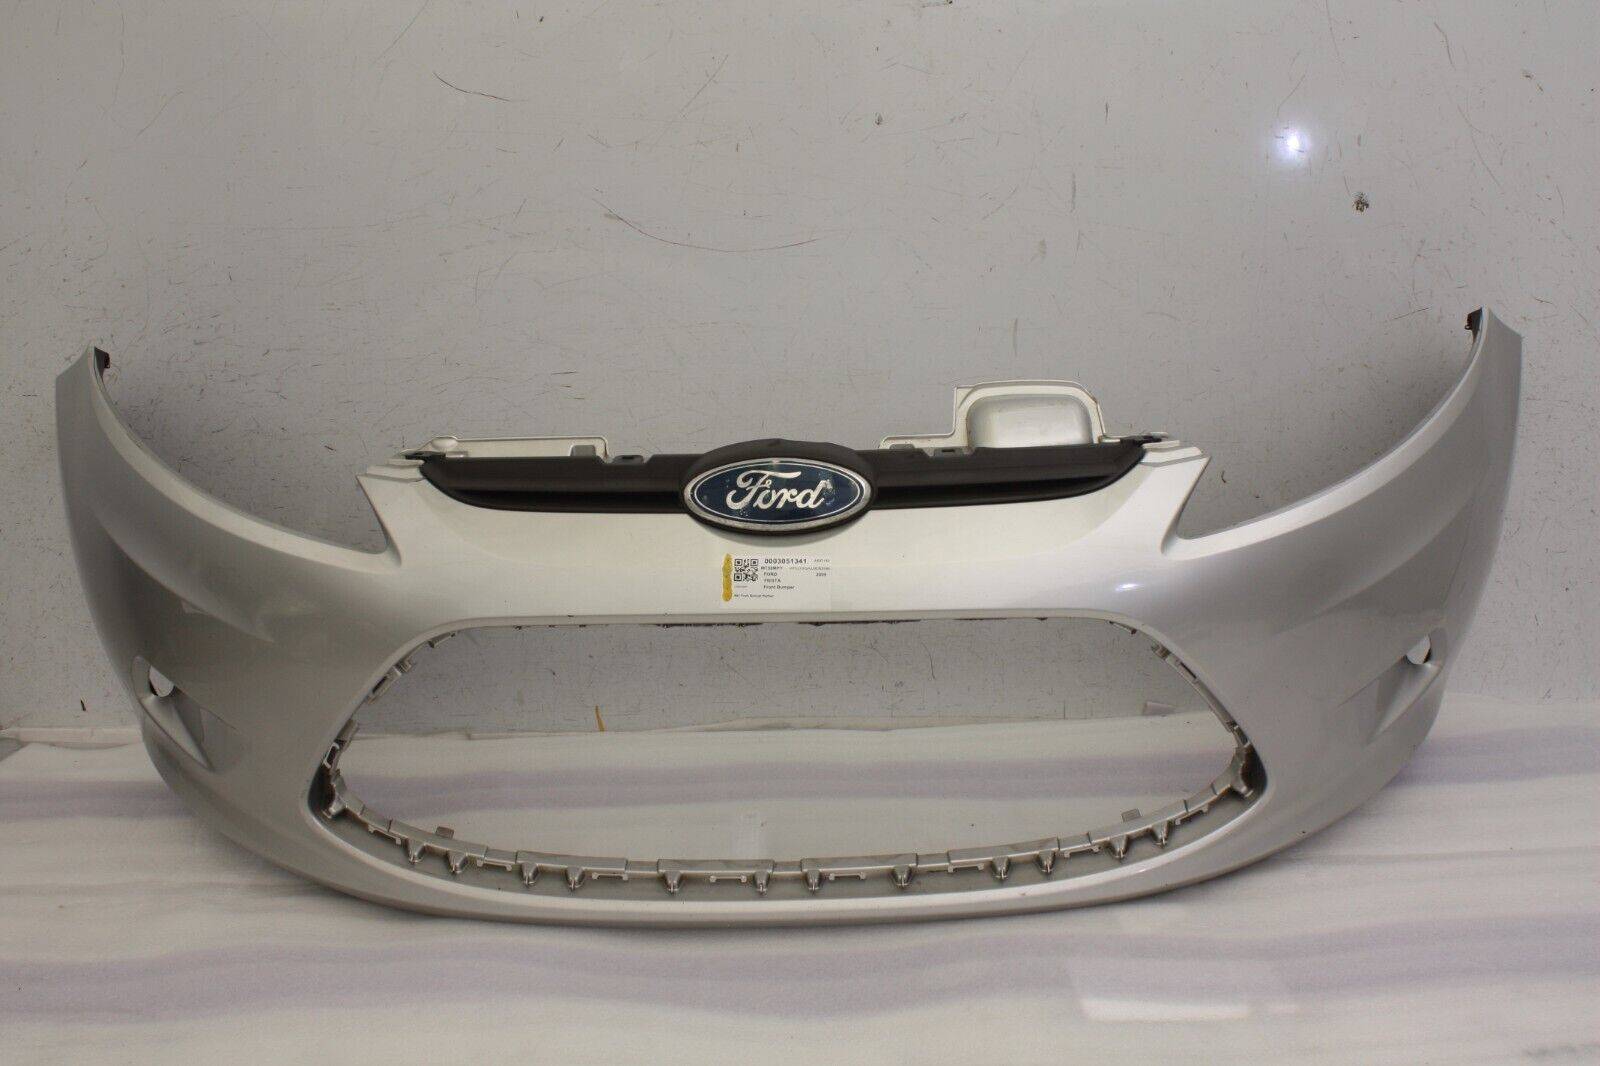 Ford Fiesta Front Bumper 2008 TO 2012 8A61 17K819 Genuine DAMAGED 176432733071